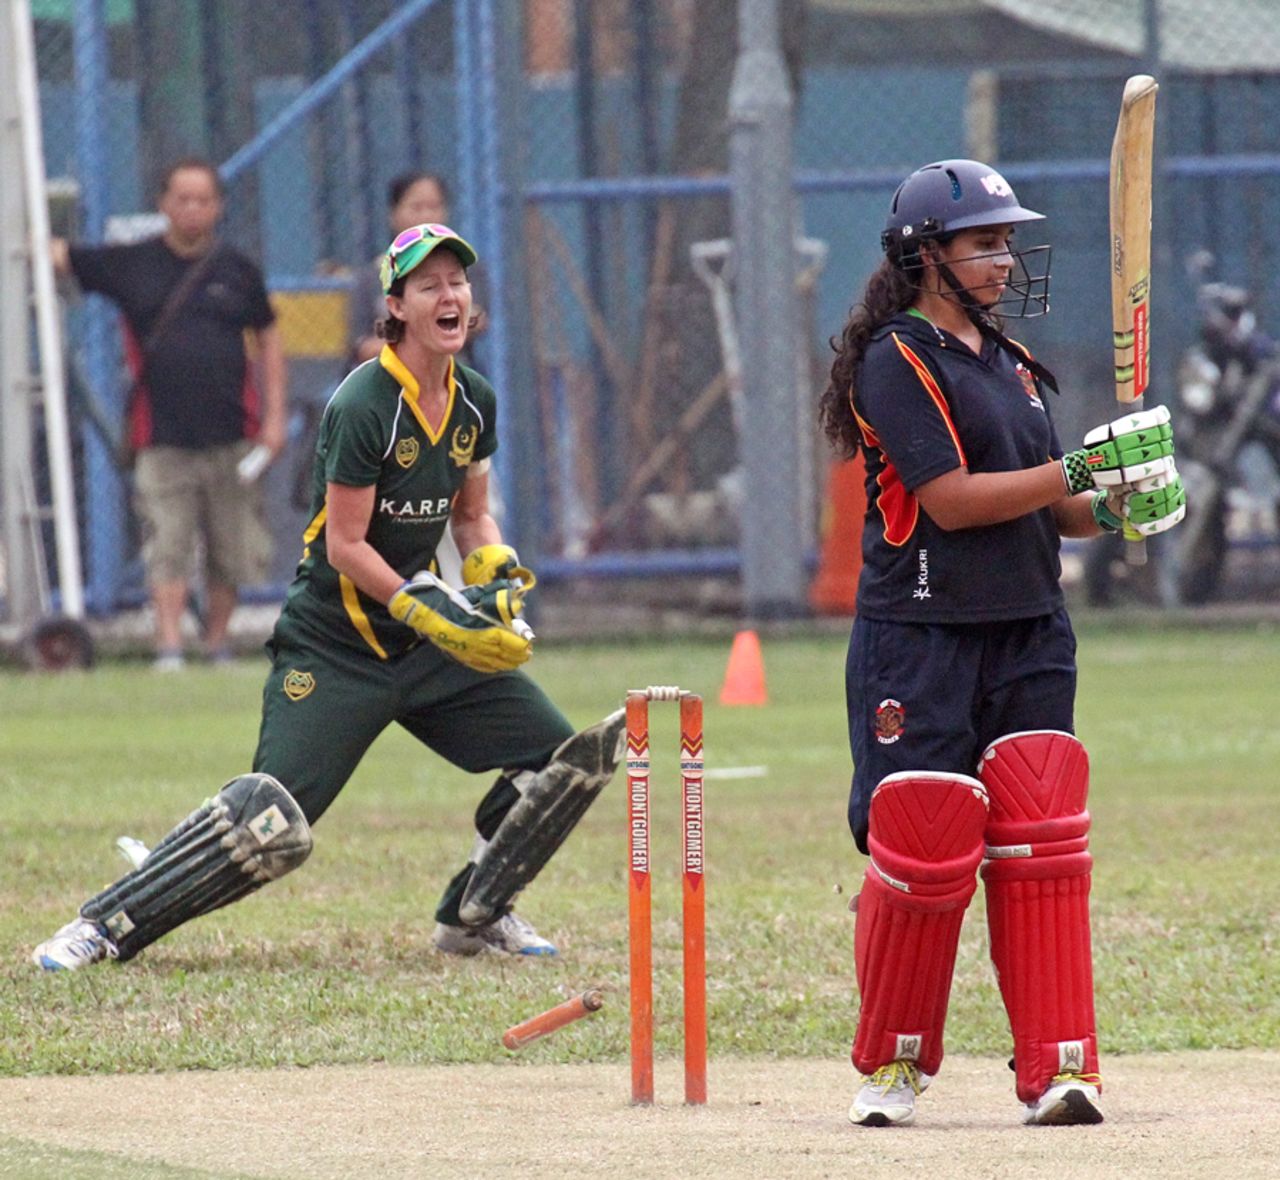 Pakistan Association's Neisha Pratt celebrates a rare success as HKCC Willow Wielders' Ishitaa Gidwani is bowled during the Women's T20 Cup final at Mission Road on 14th October 2012